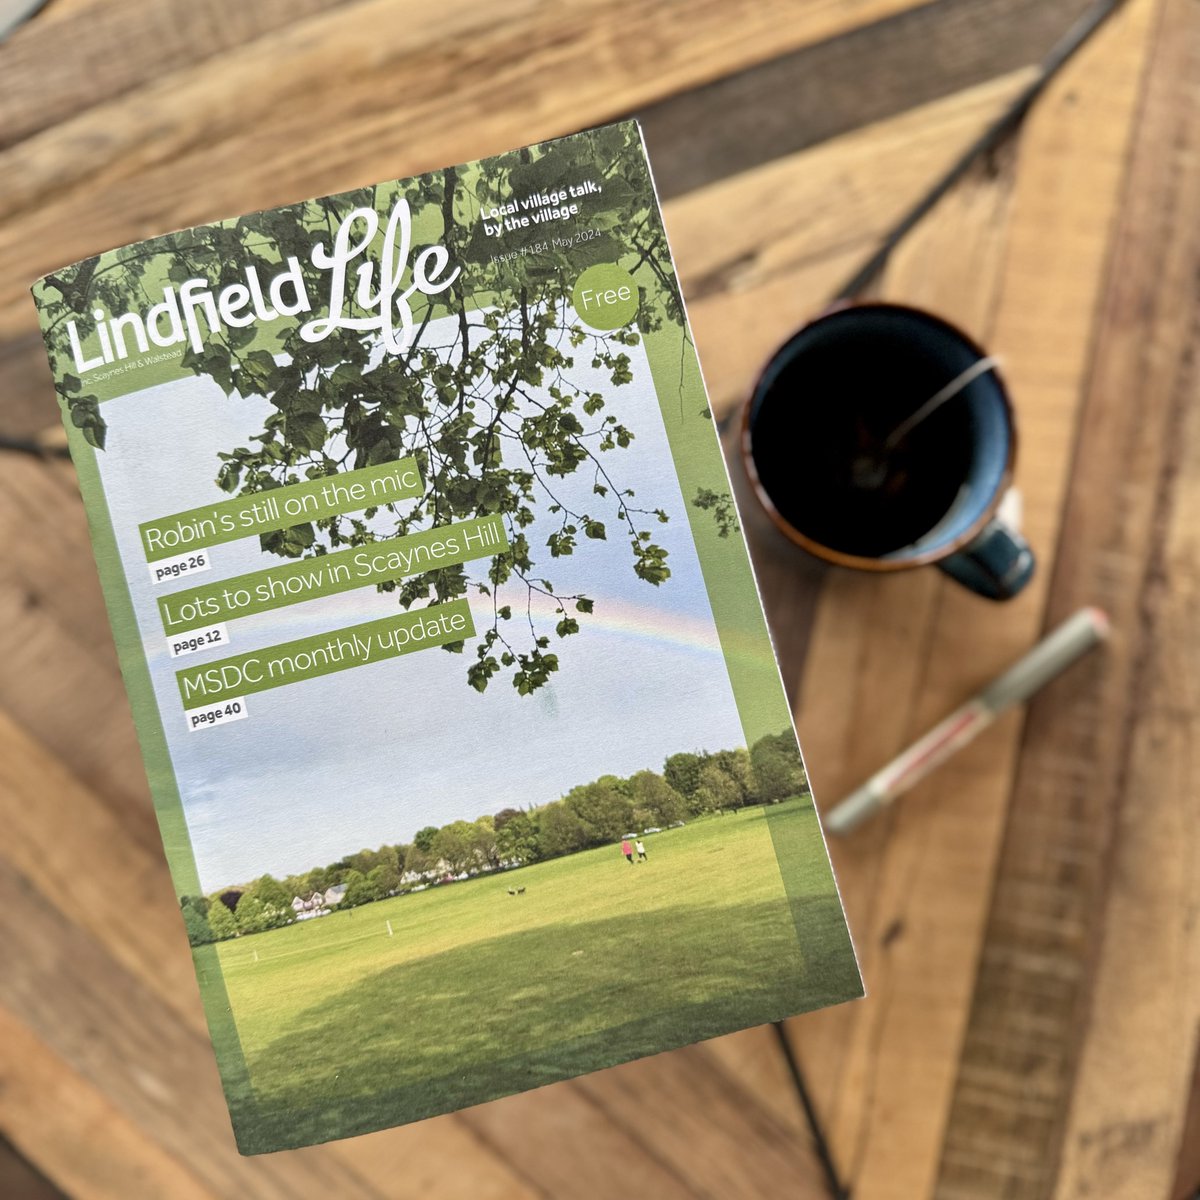 The latest copy of #LindfieldLife is being delivered by our distributors this week. It's almost time for the most important tea break of the month! #Lindfield #Community #Print #magazine #midsussex